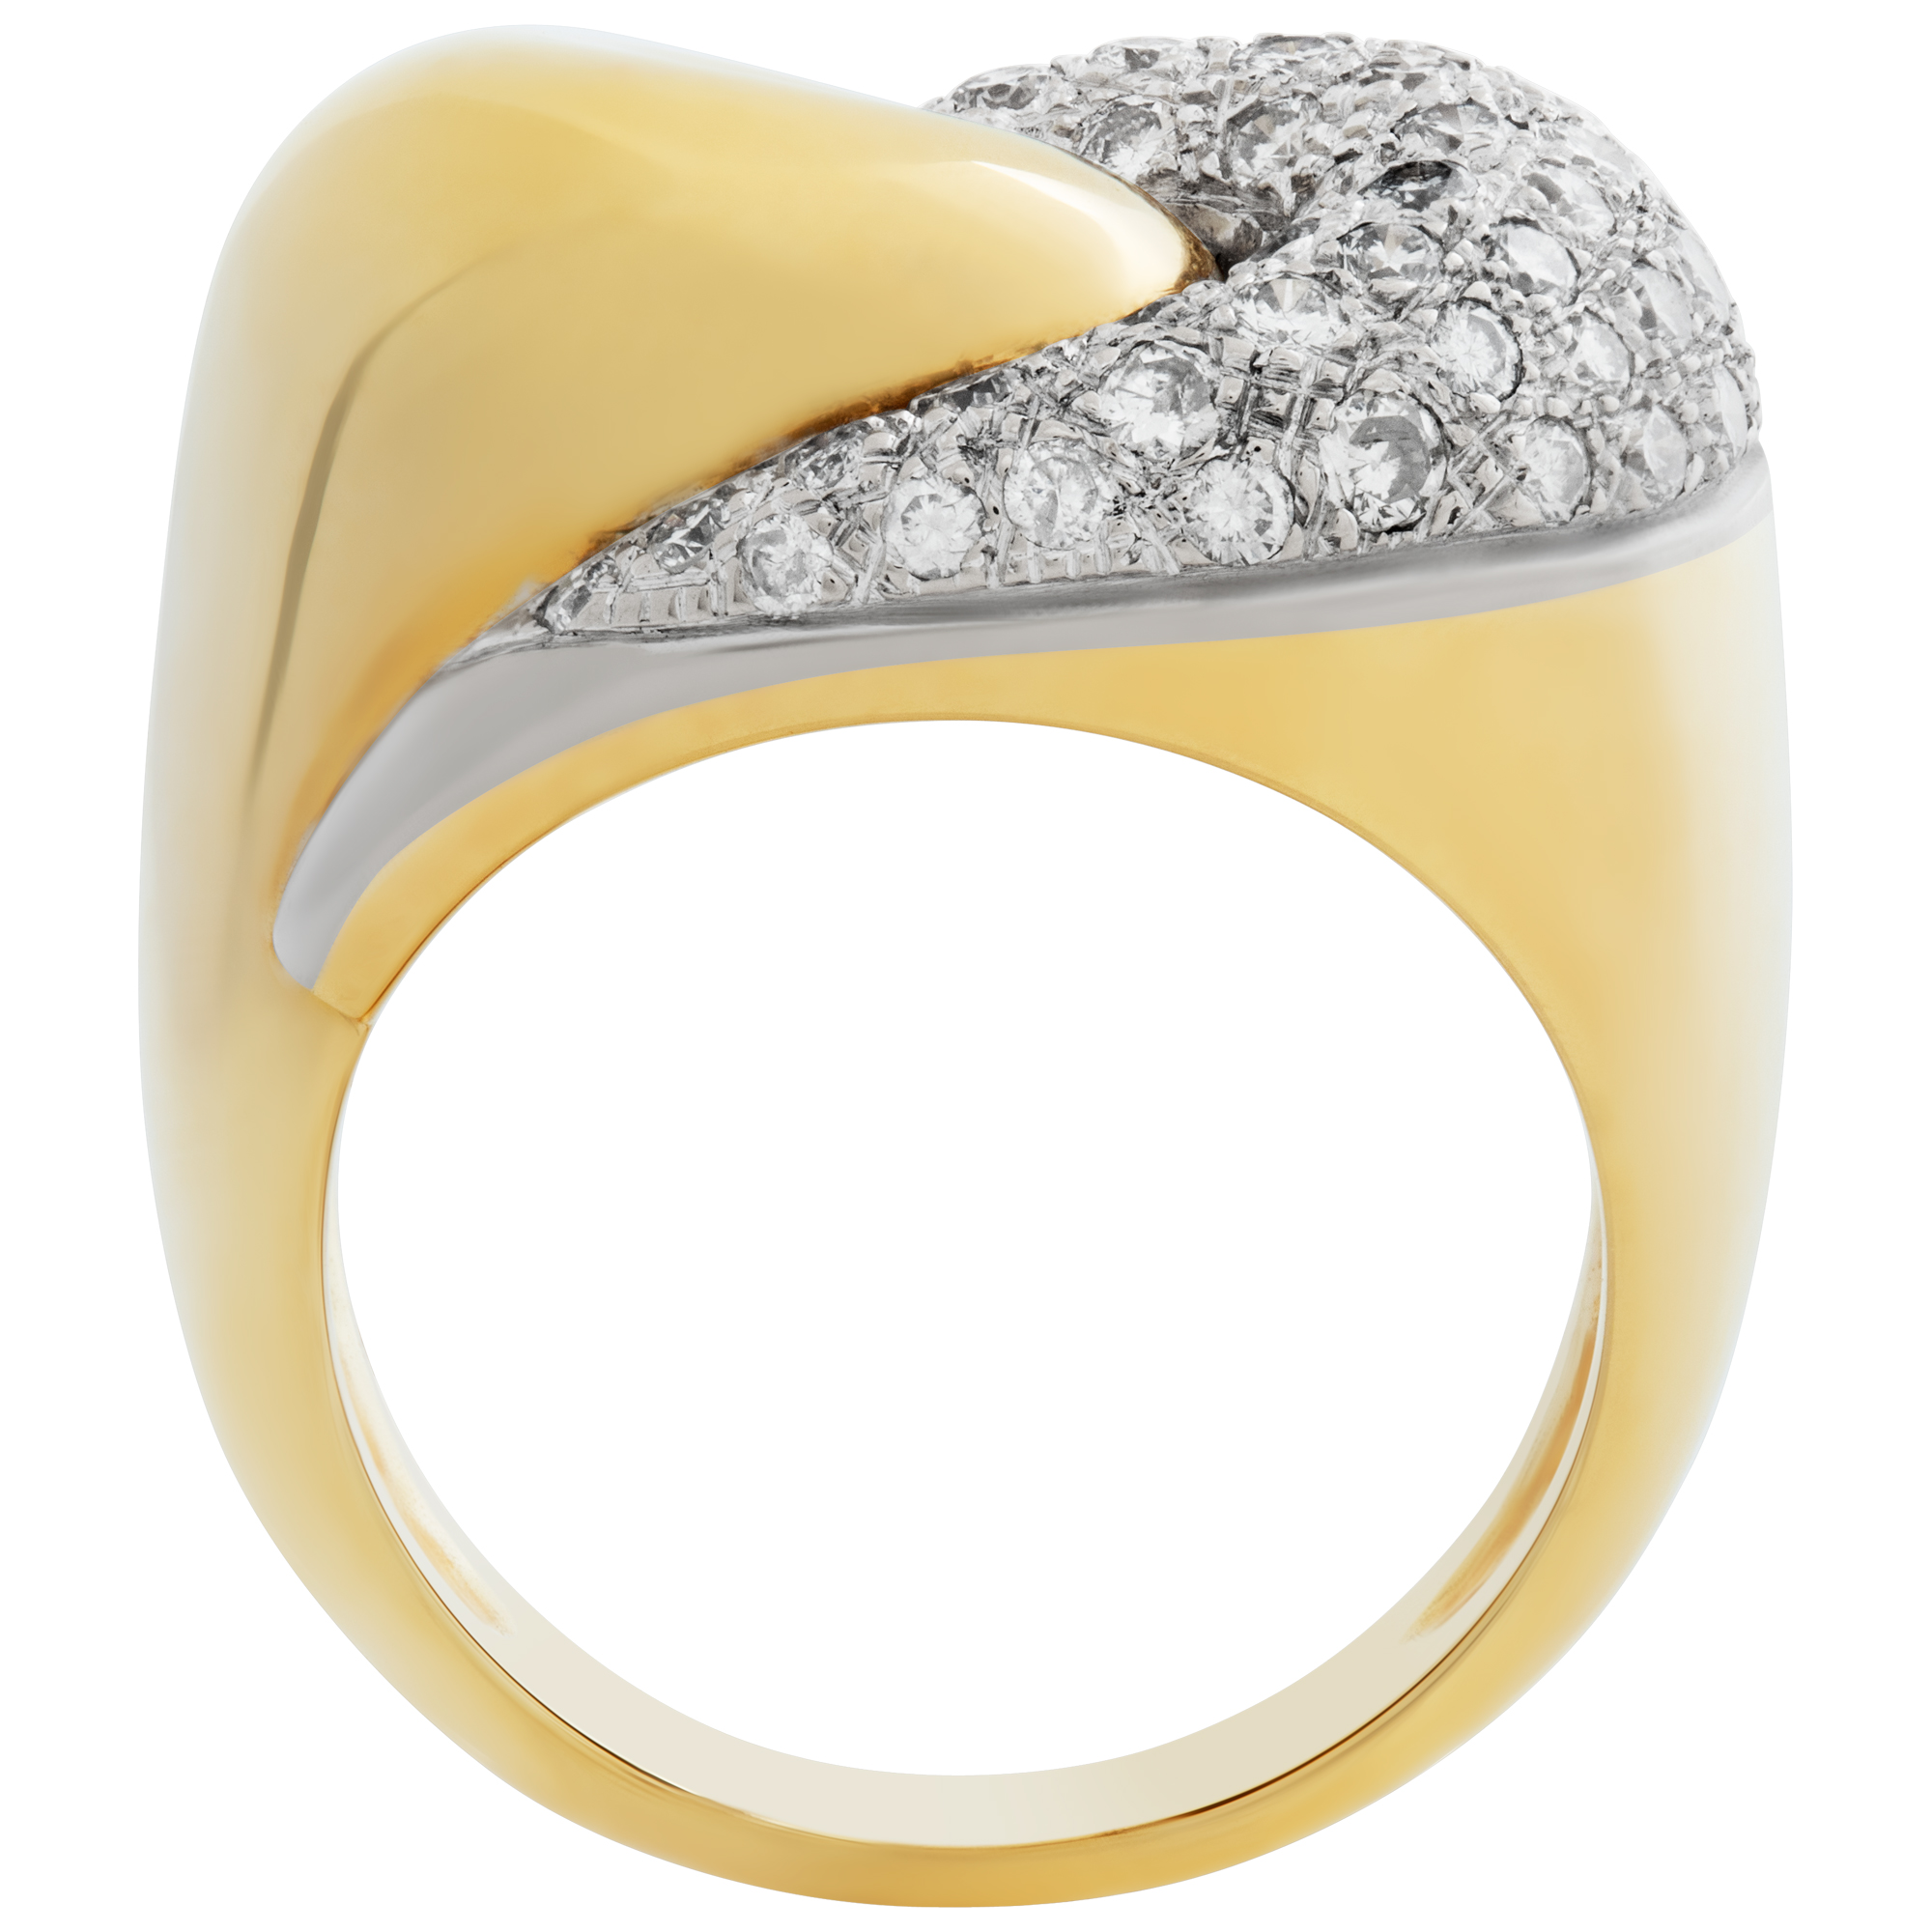 Pave diamond ring in 18k yellow gold with approximately 1.00 carat round brilliant cut diamonds. image 4